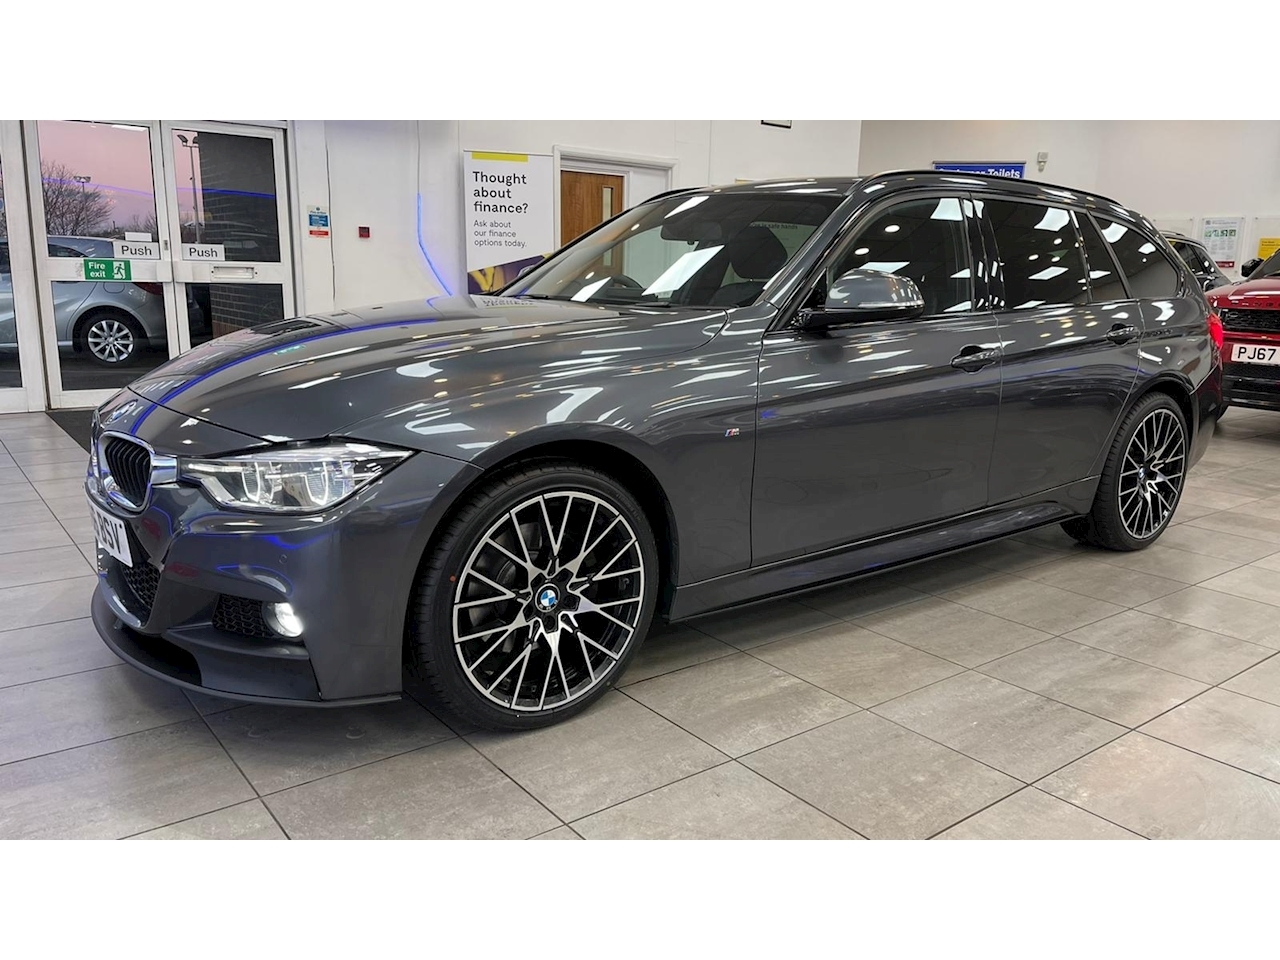 3 Series 3.0 330d M Sport Touring 5dr Diesel Auto xDrive (s/s) (258 ps)